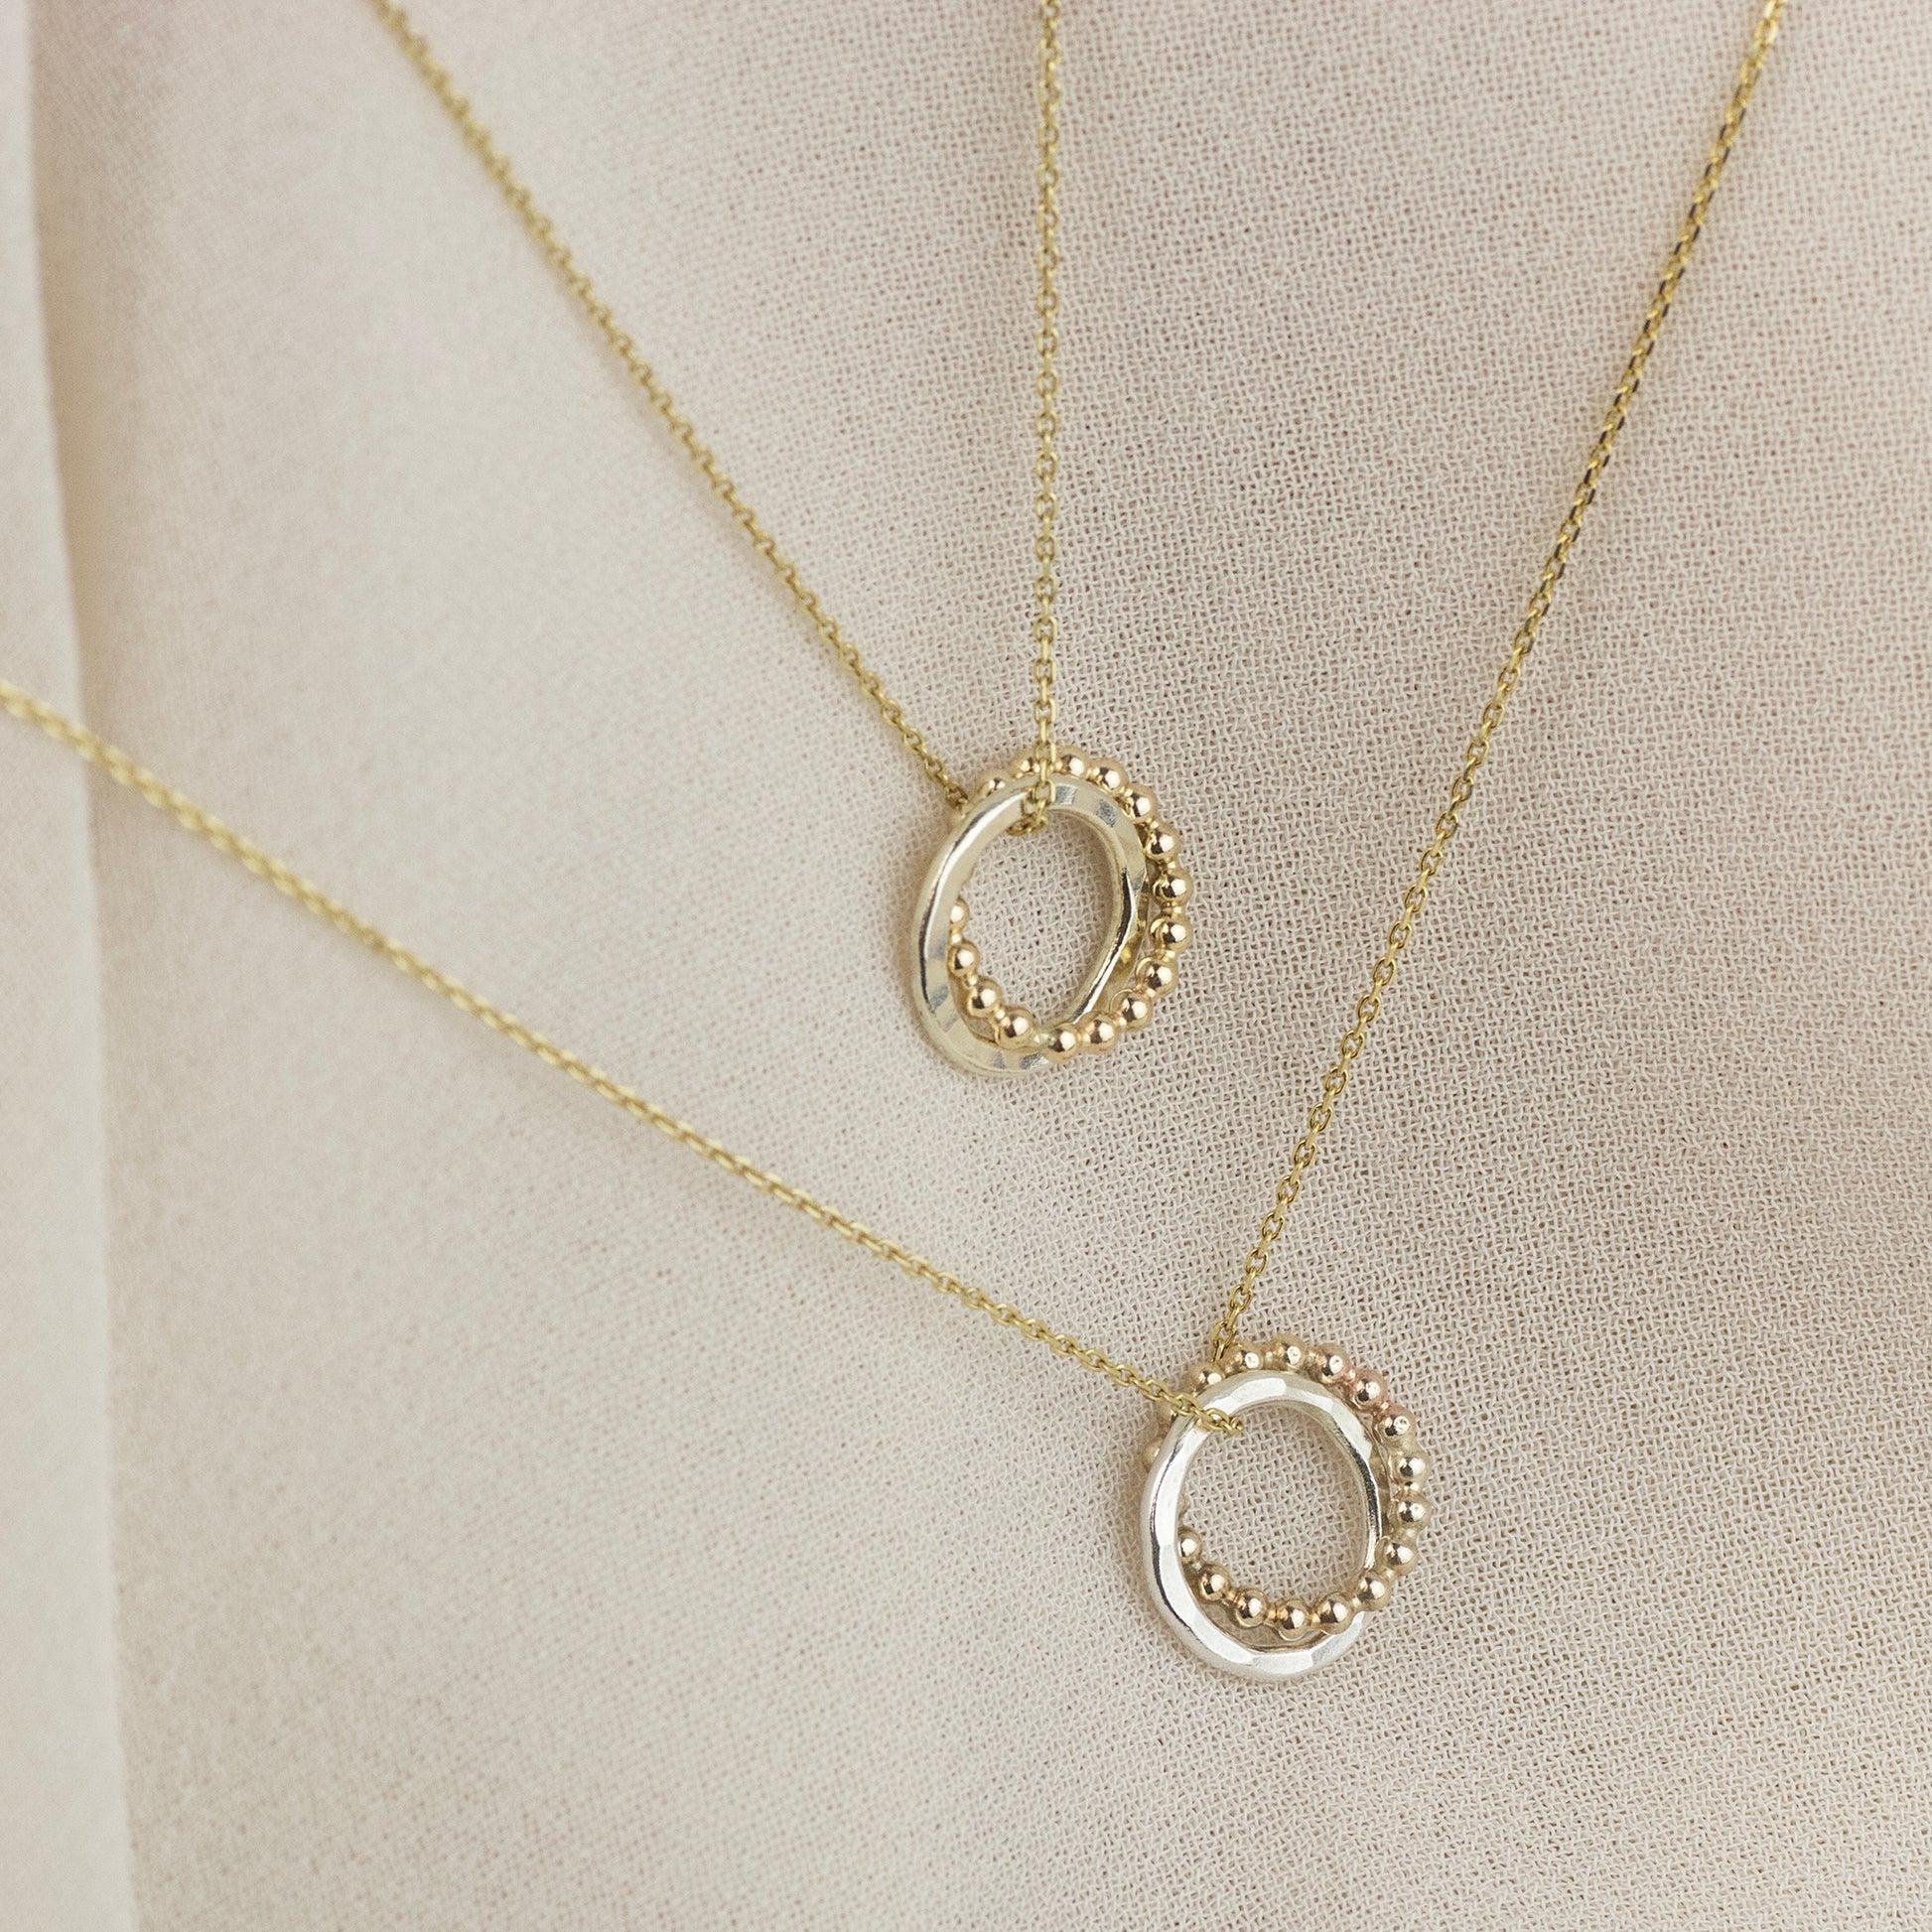 Sisters Necklaces Matching Set - 9kt Gold & Silver Love Knot Necklaces